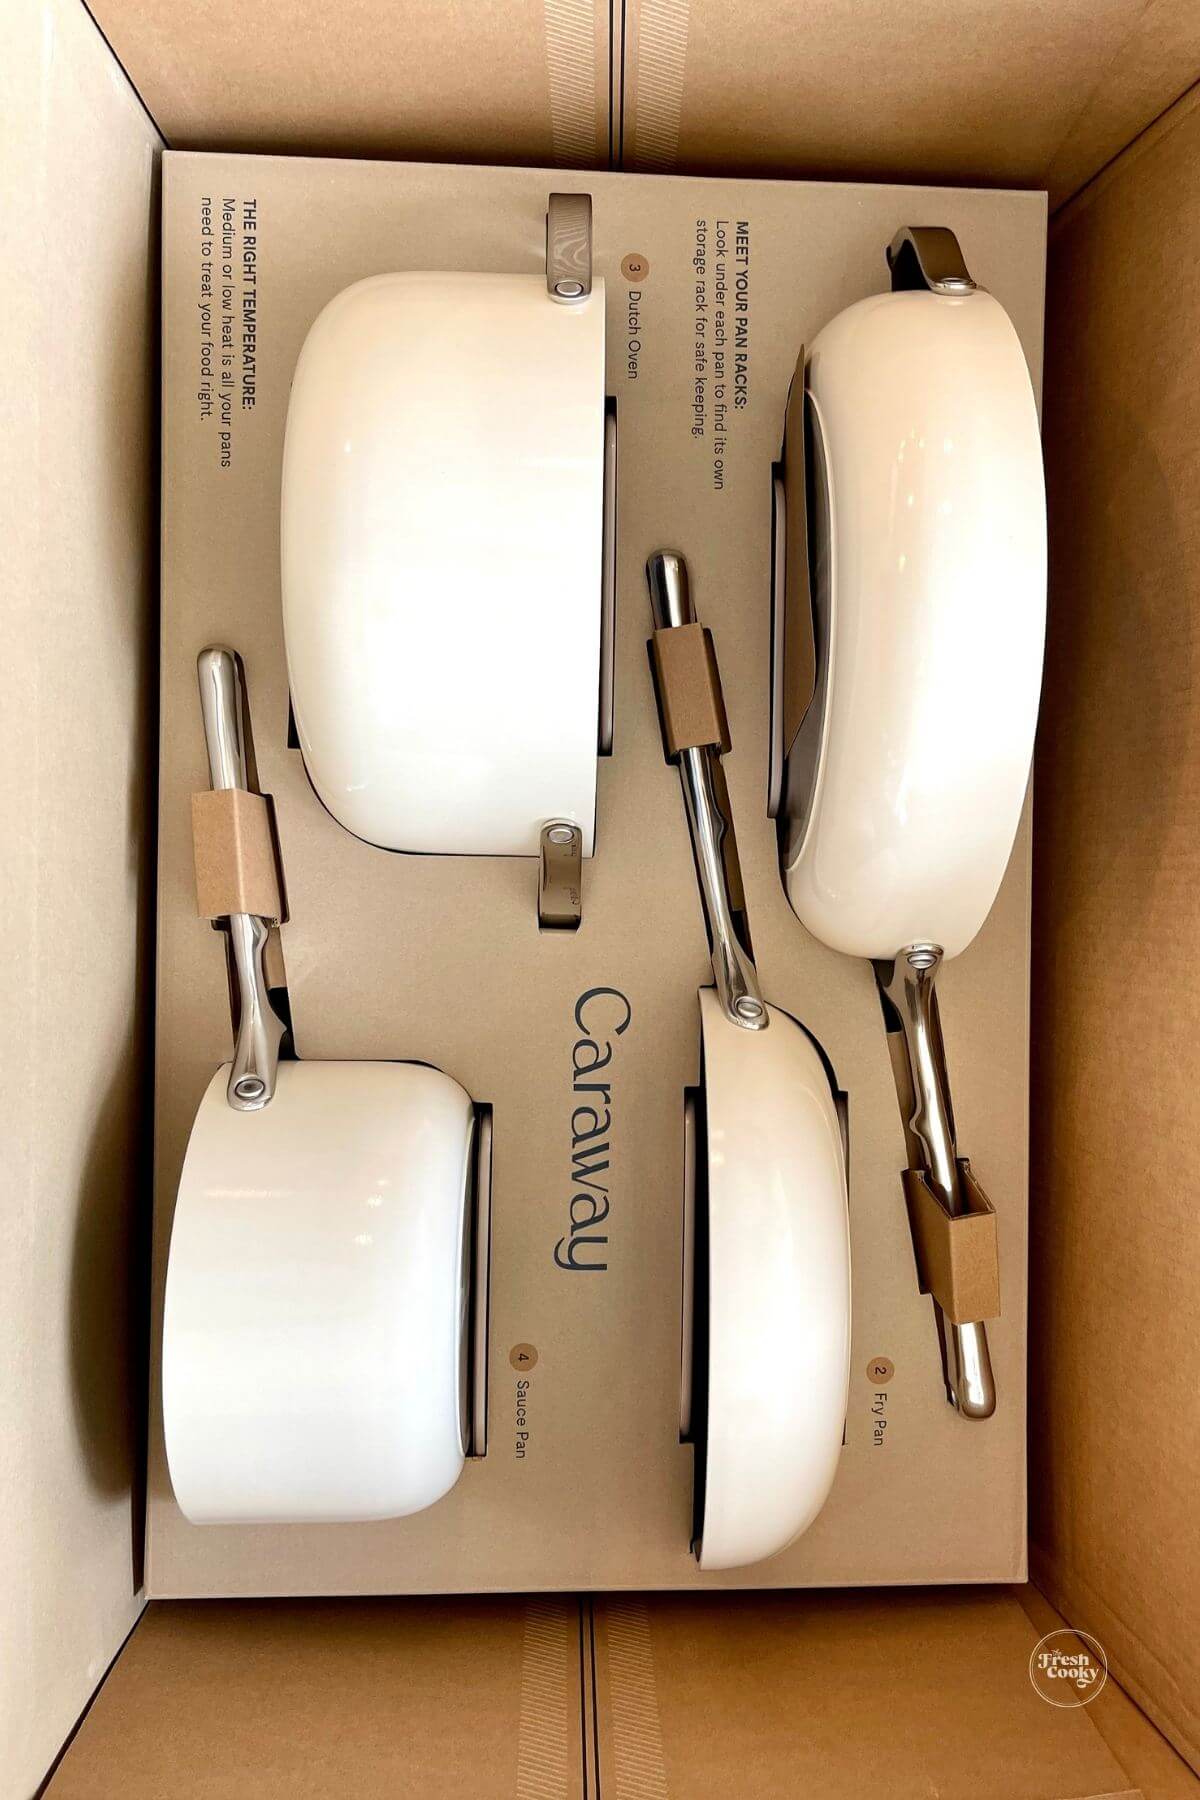 Caraway pots and pans in their box.